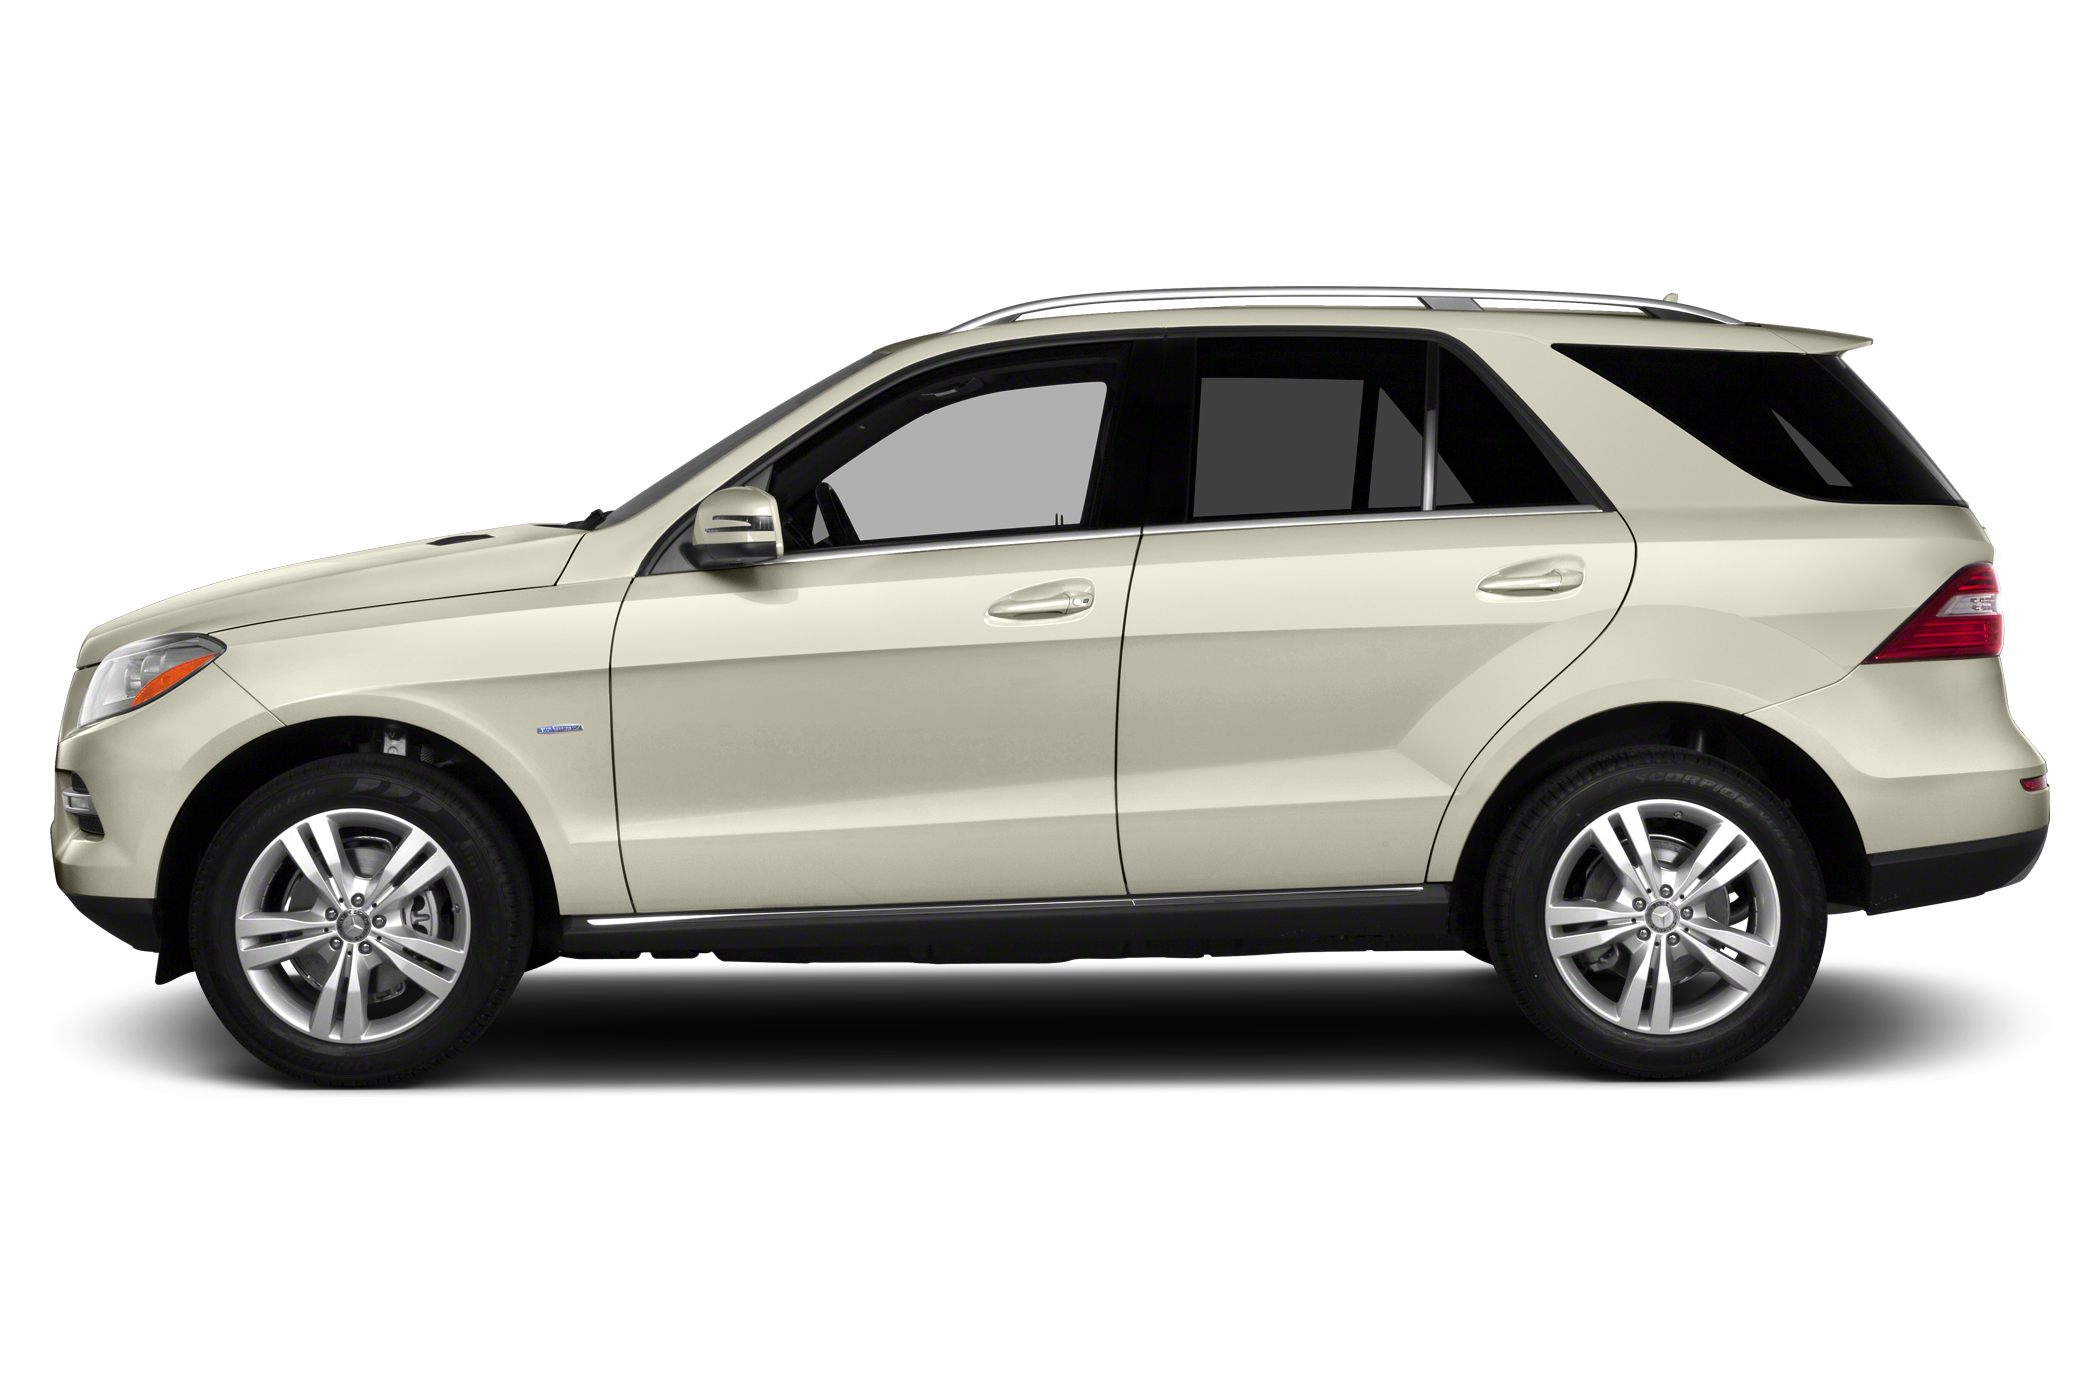  Mercedes-Benz Ml350 oem parts and accessories on sale